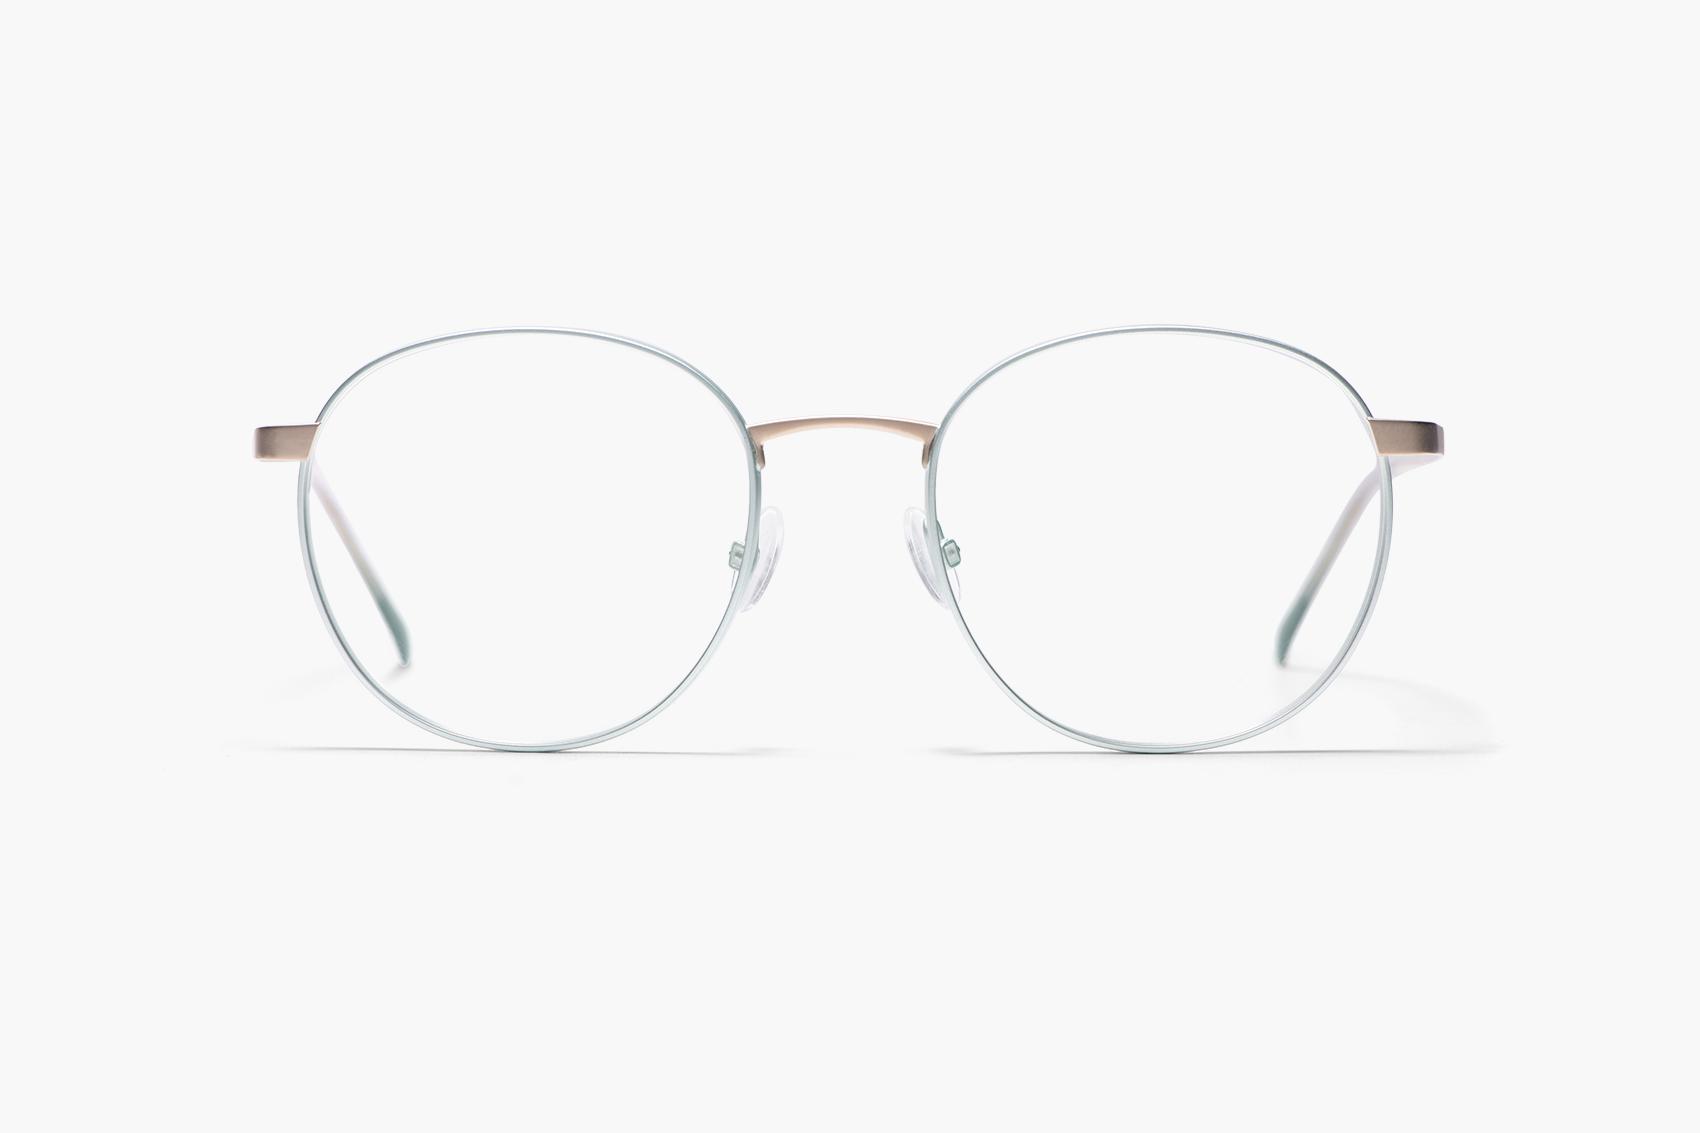 Dagley by GÖTTI | Try on glasses online & find optician |